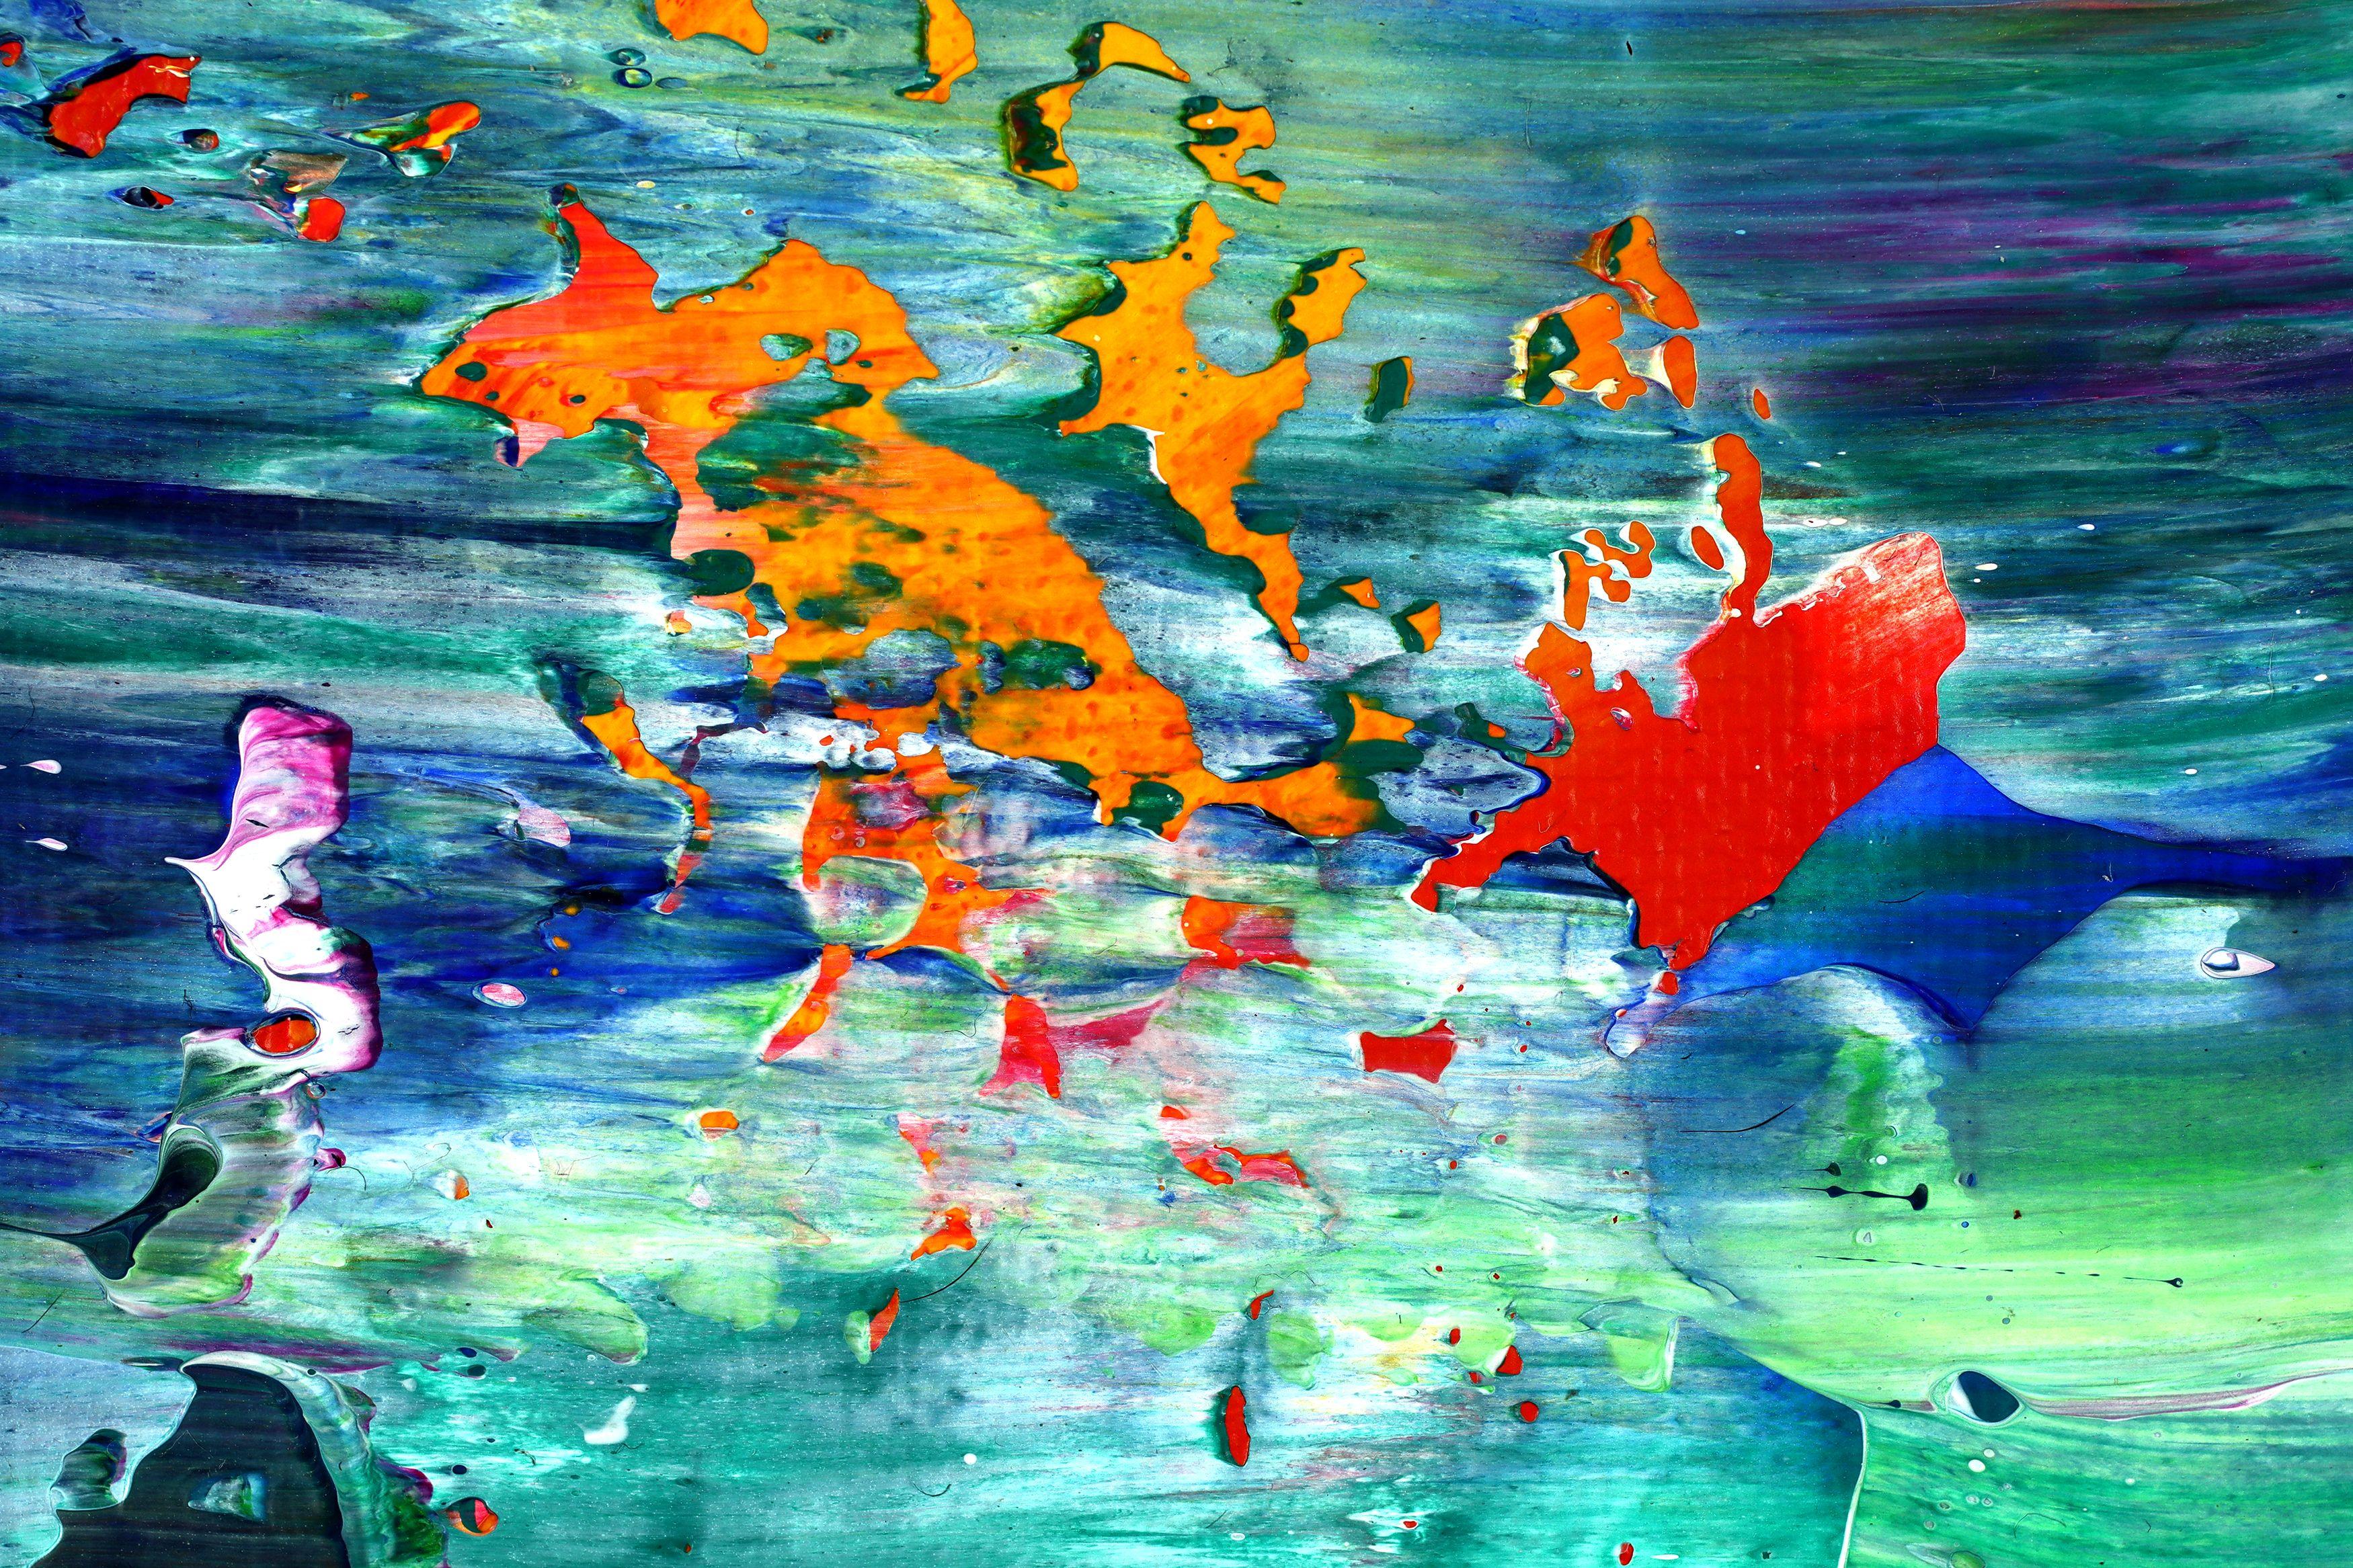 abstract painting  acrylic on canvas    This artwork was created layering and blending layers of blue, turquoise, magenta, teal, orange,pink undertones. Signed and ready to hang.    For this work I used a large palette knife and hand mixed acrylic